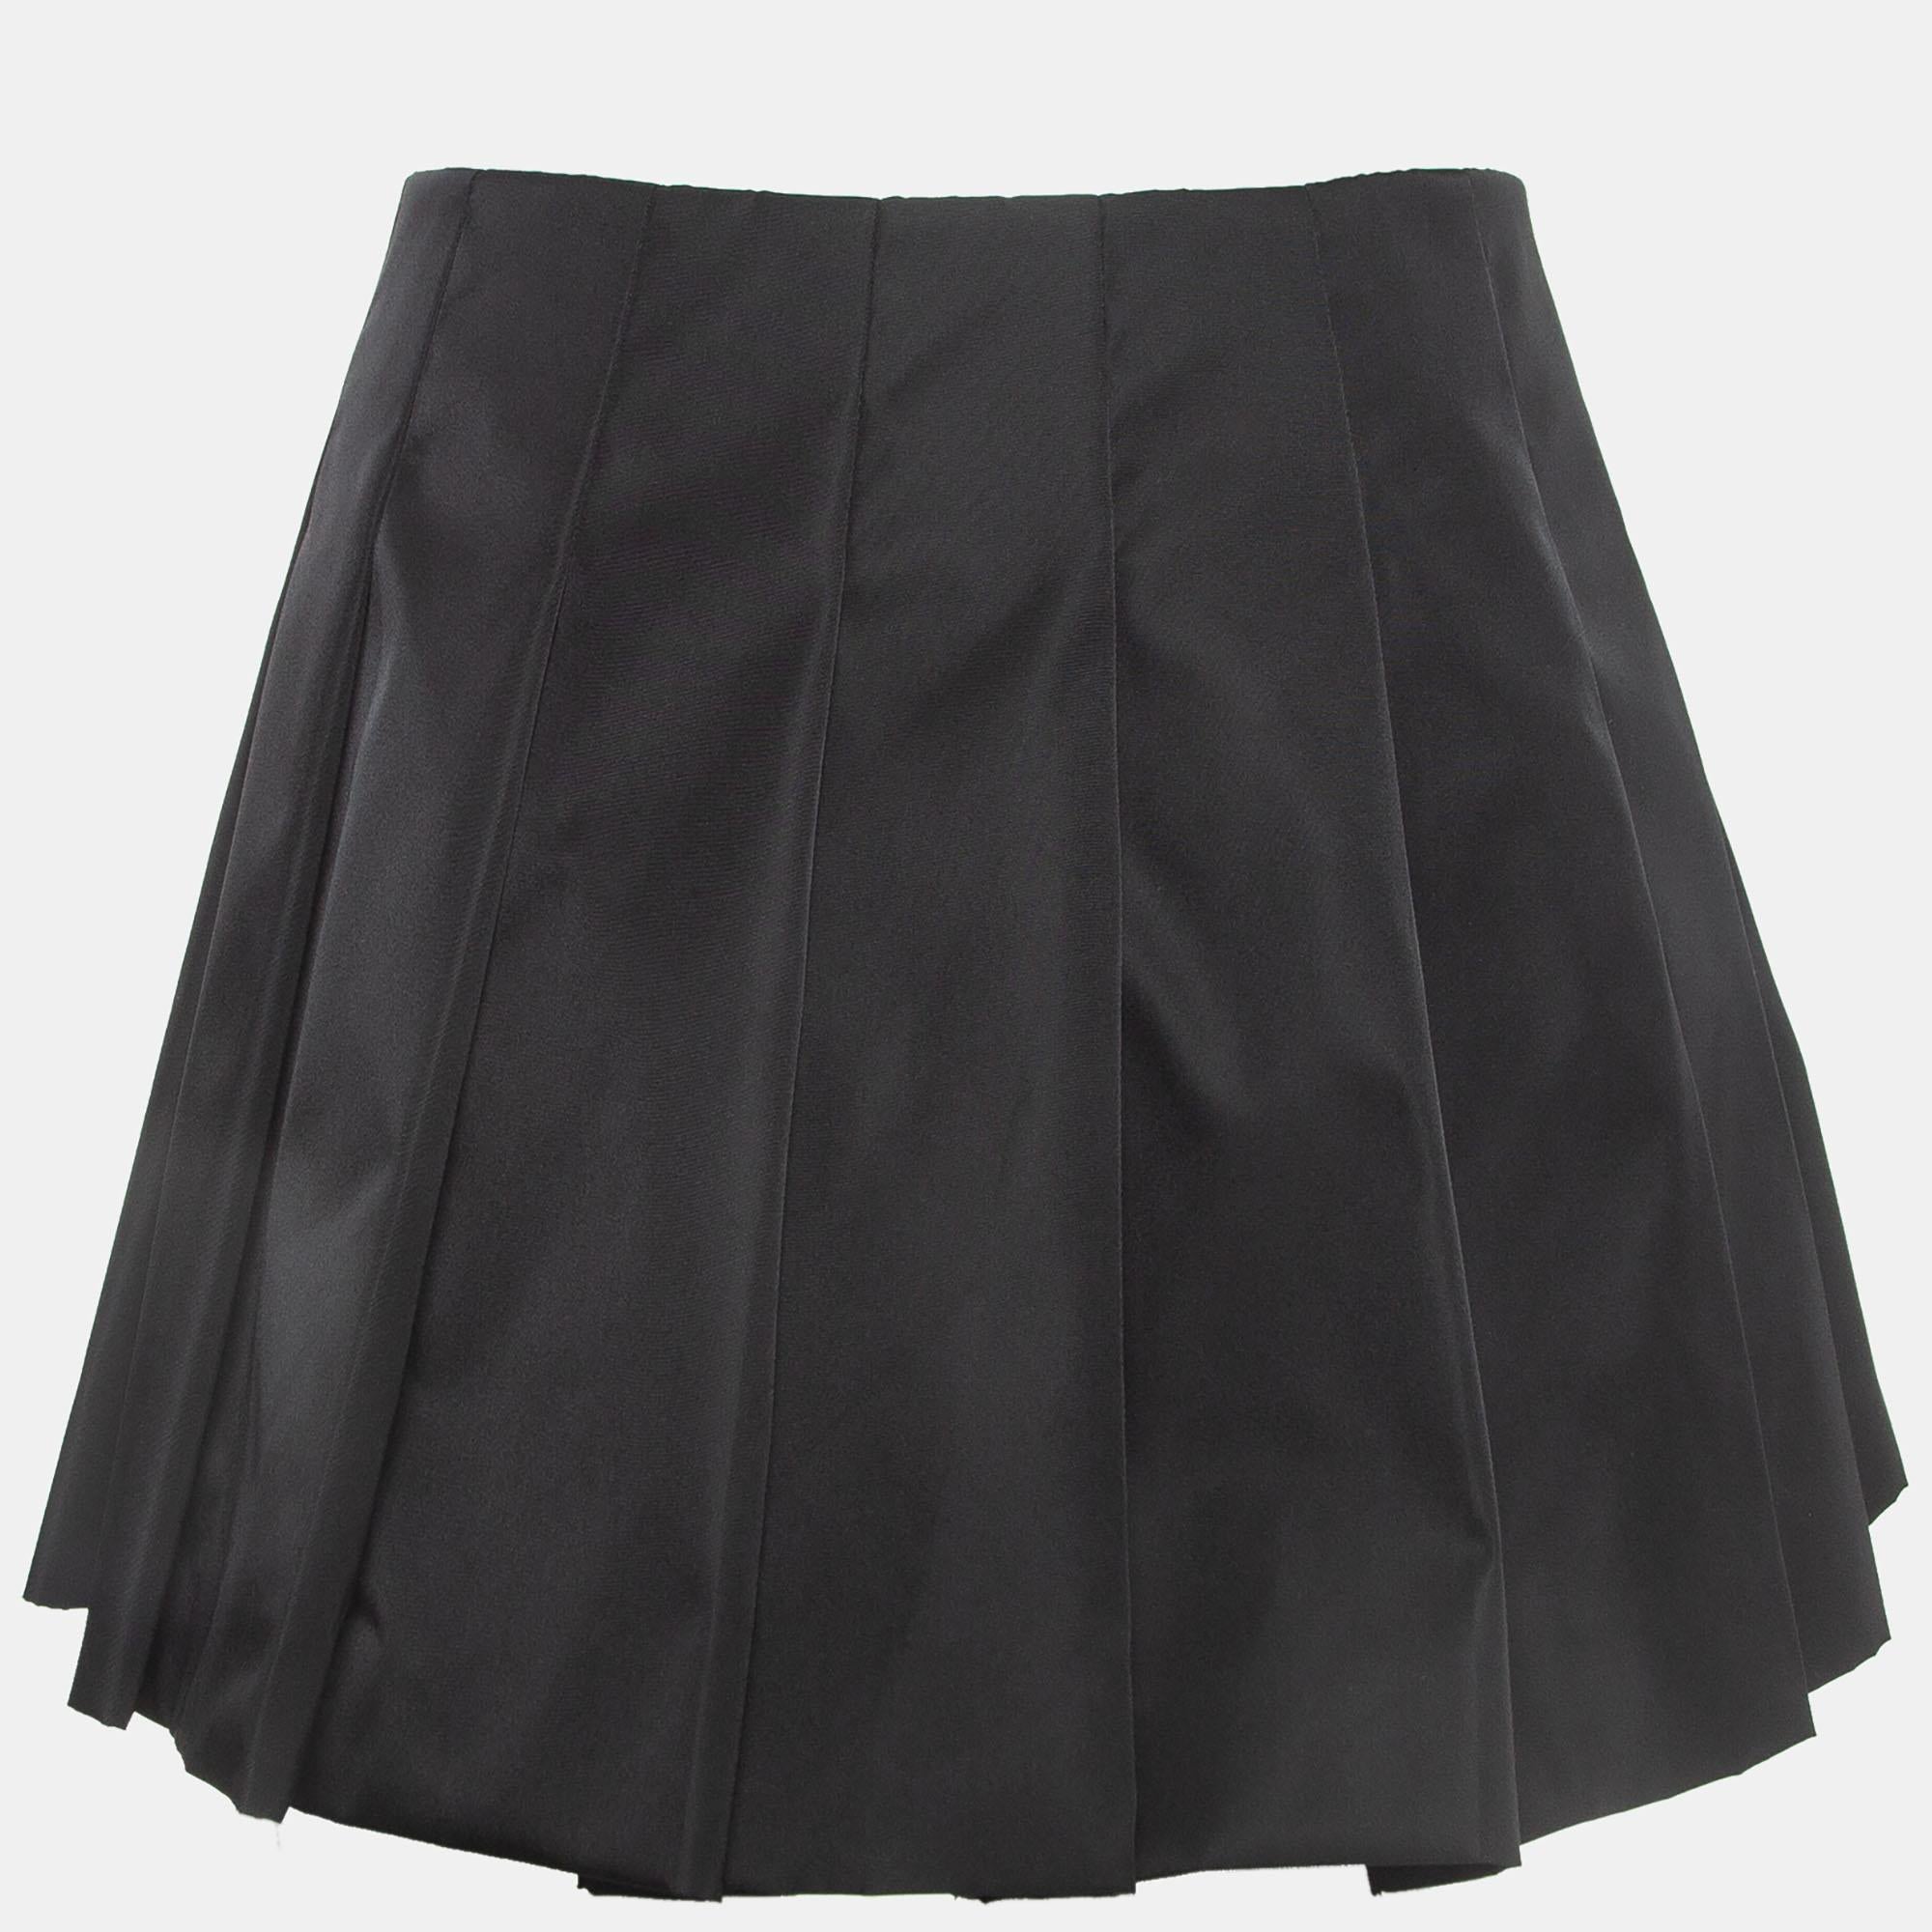 Crafted by Prada, this elegant mini skirt exudes sophistication with its pleated design and sleek silhouette. Made from recycled nylon, it features a distinctive belt detail, adding a touch of modern flair. Perfect for both casual outings and